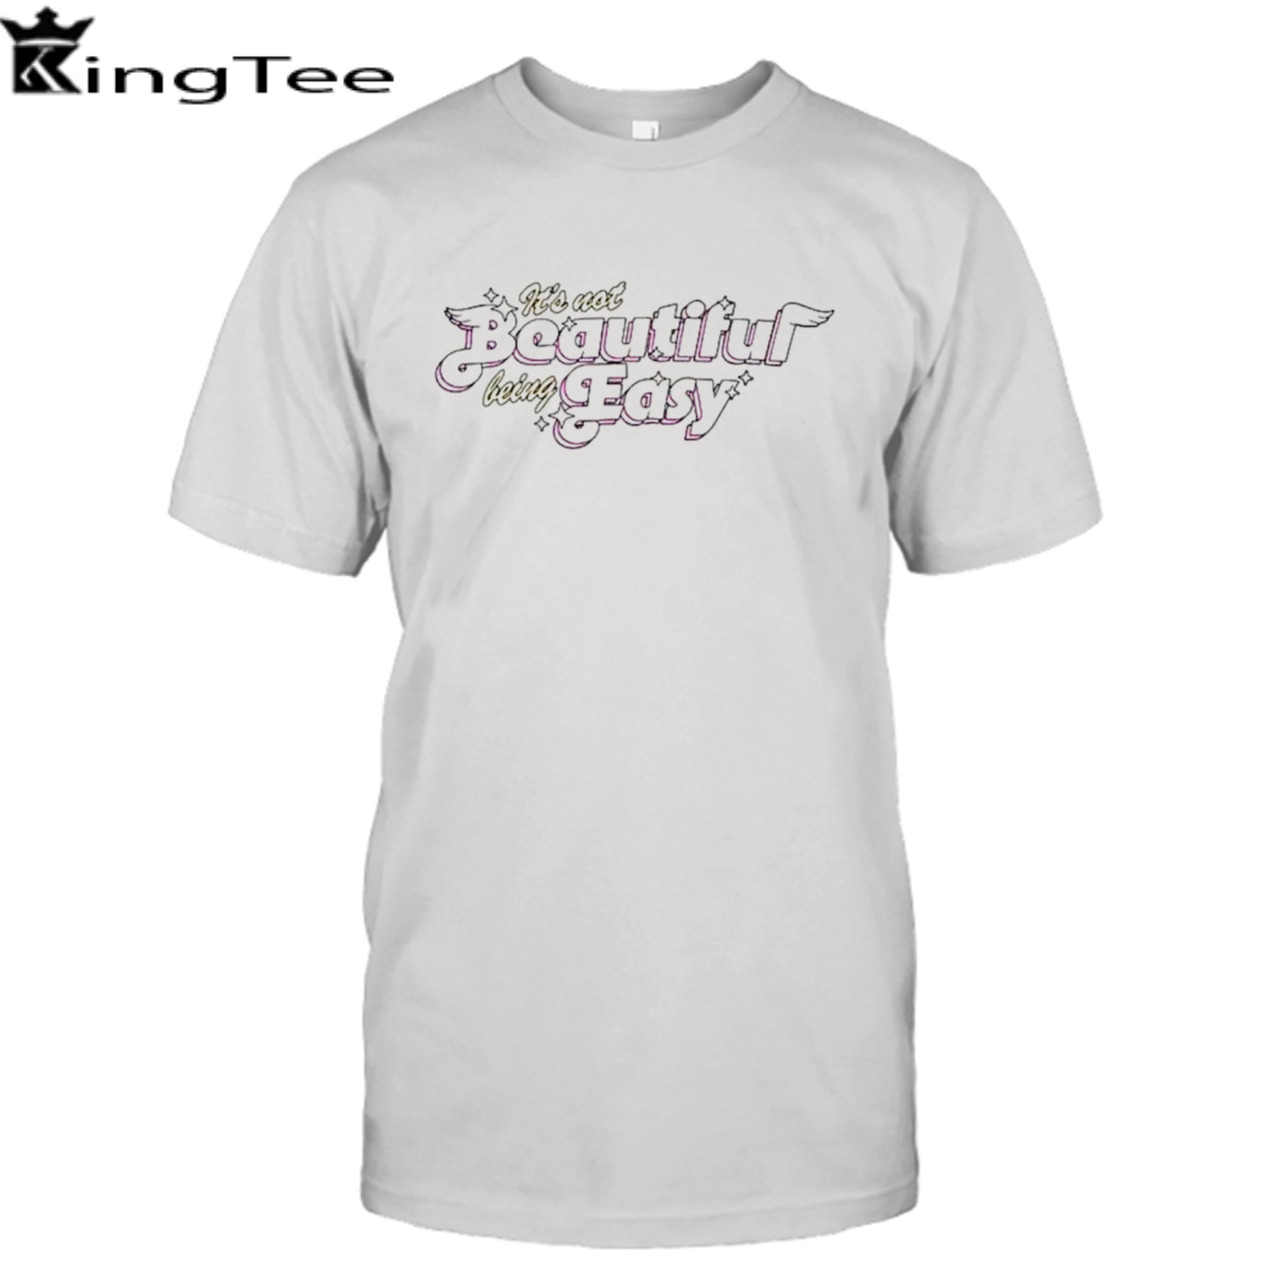 It’s not beautiful being easy shirt